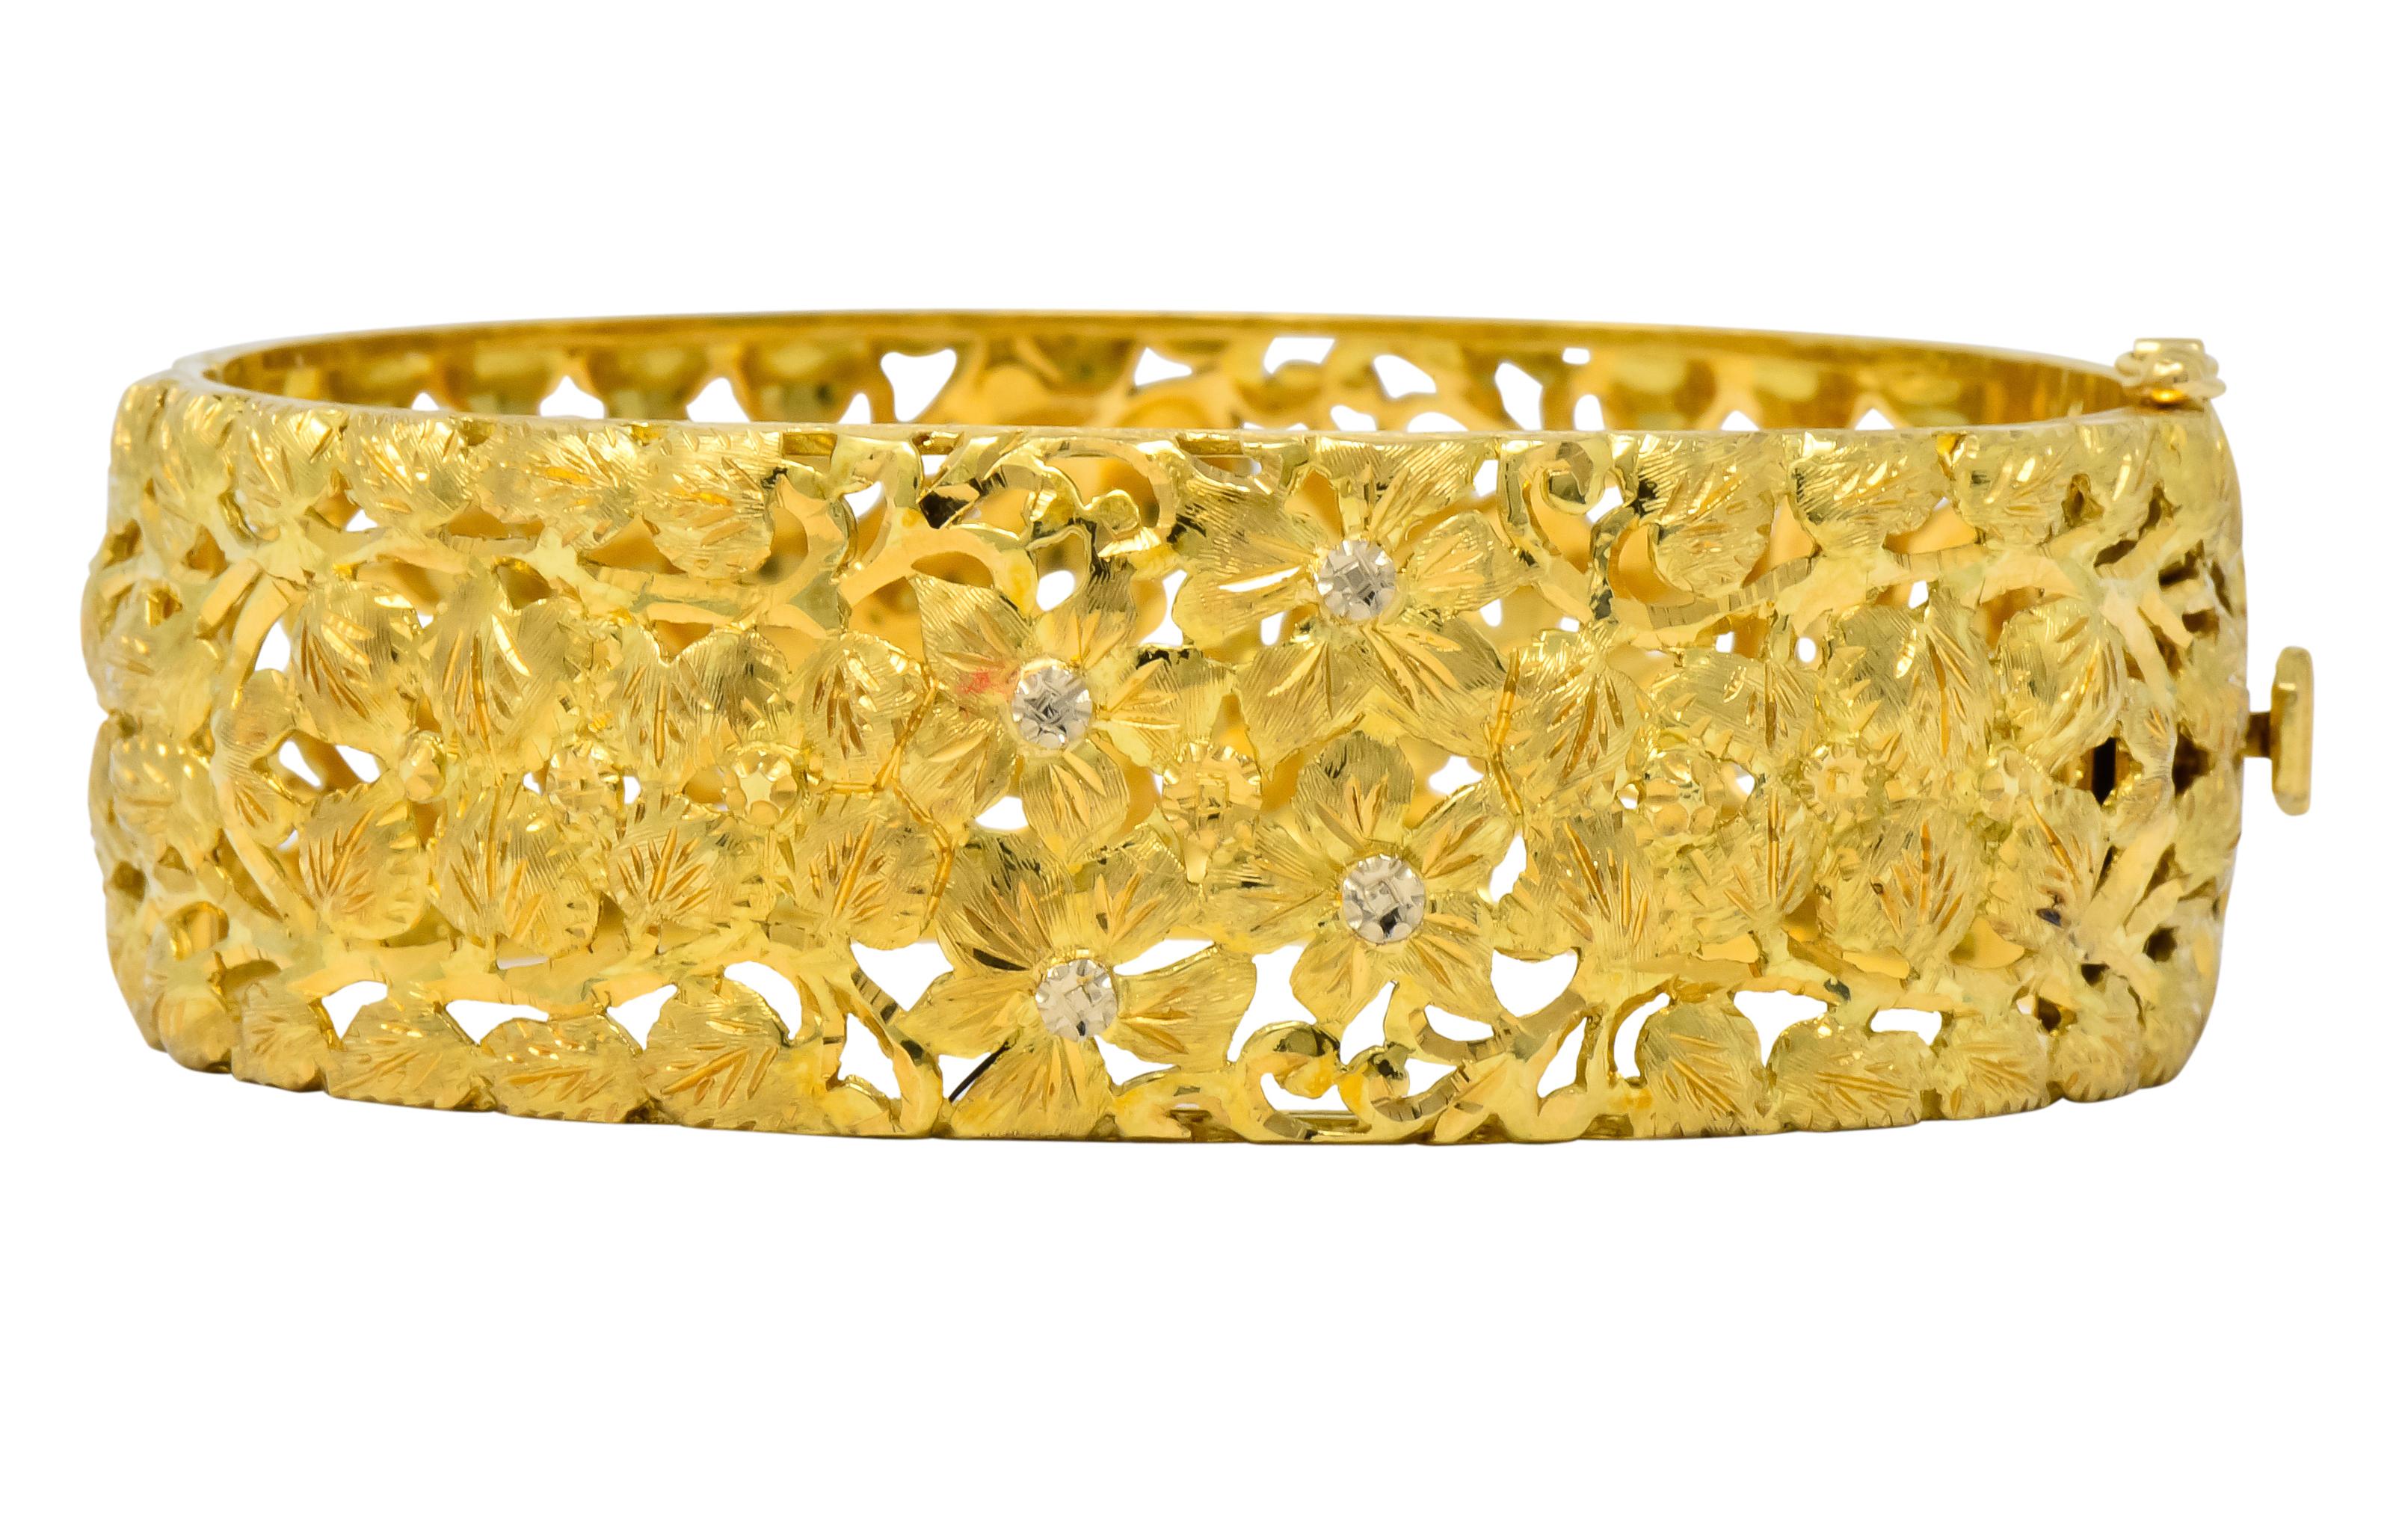 Featuring a wide hinged bangle with pierced floral design 

Etched details contrast with brushed finish

Completed by concealed clasp and fold-over safety

Fully signed Milor, Italy, and stamped 750

Inner Circumference: 7 inches

Width: 7/8